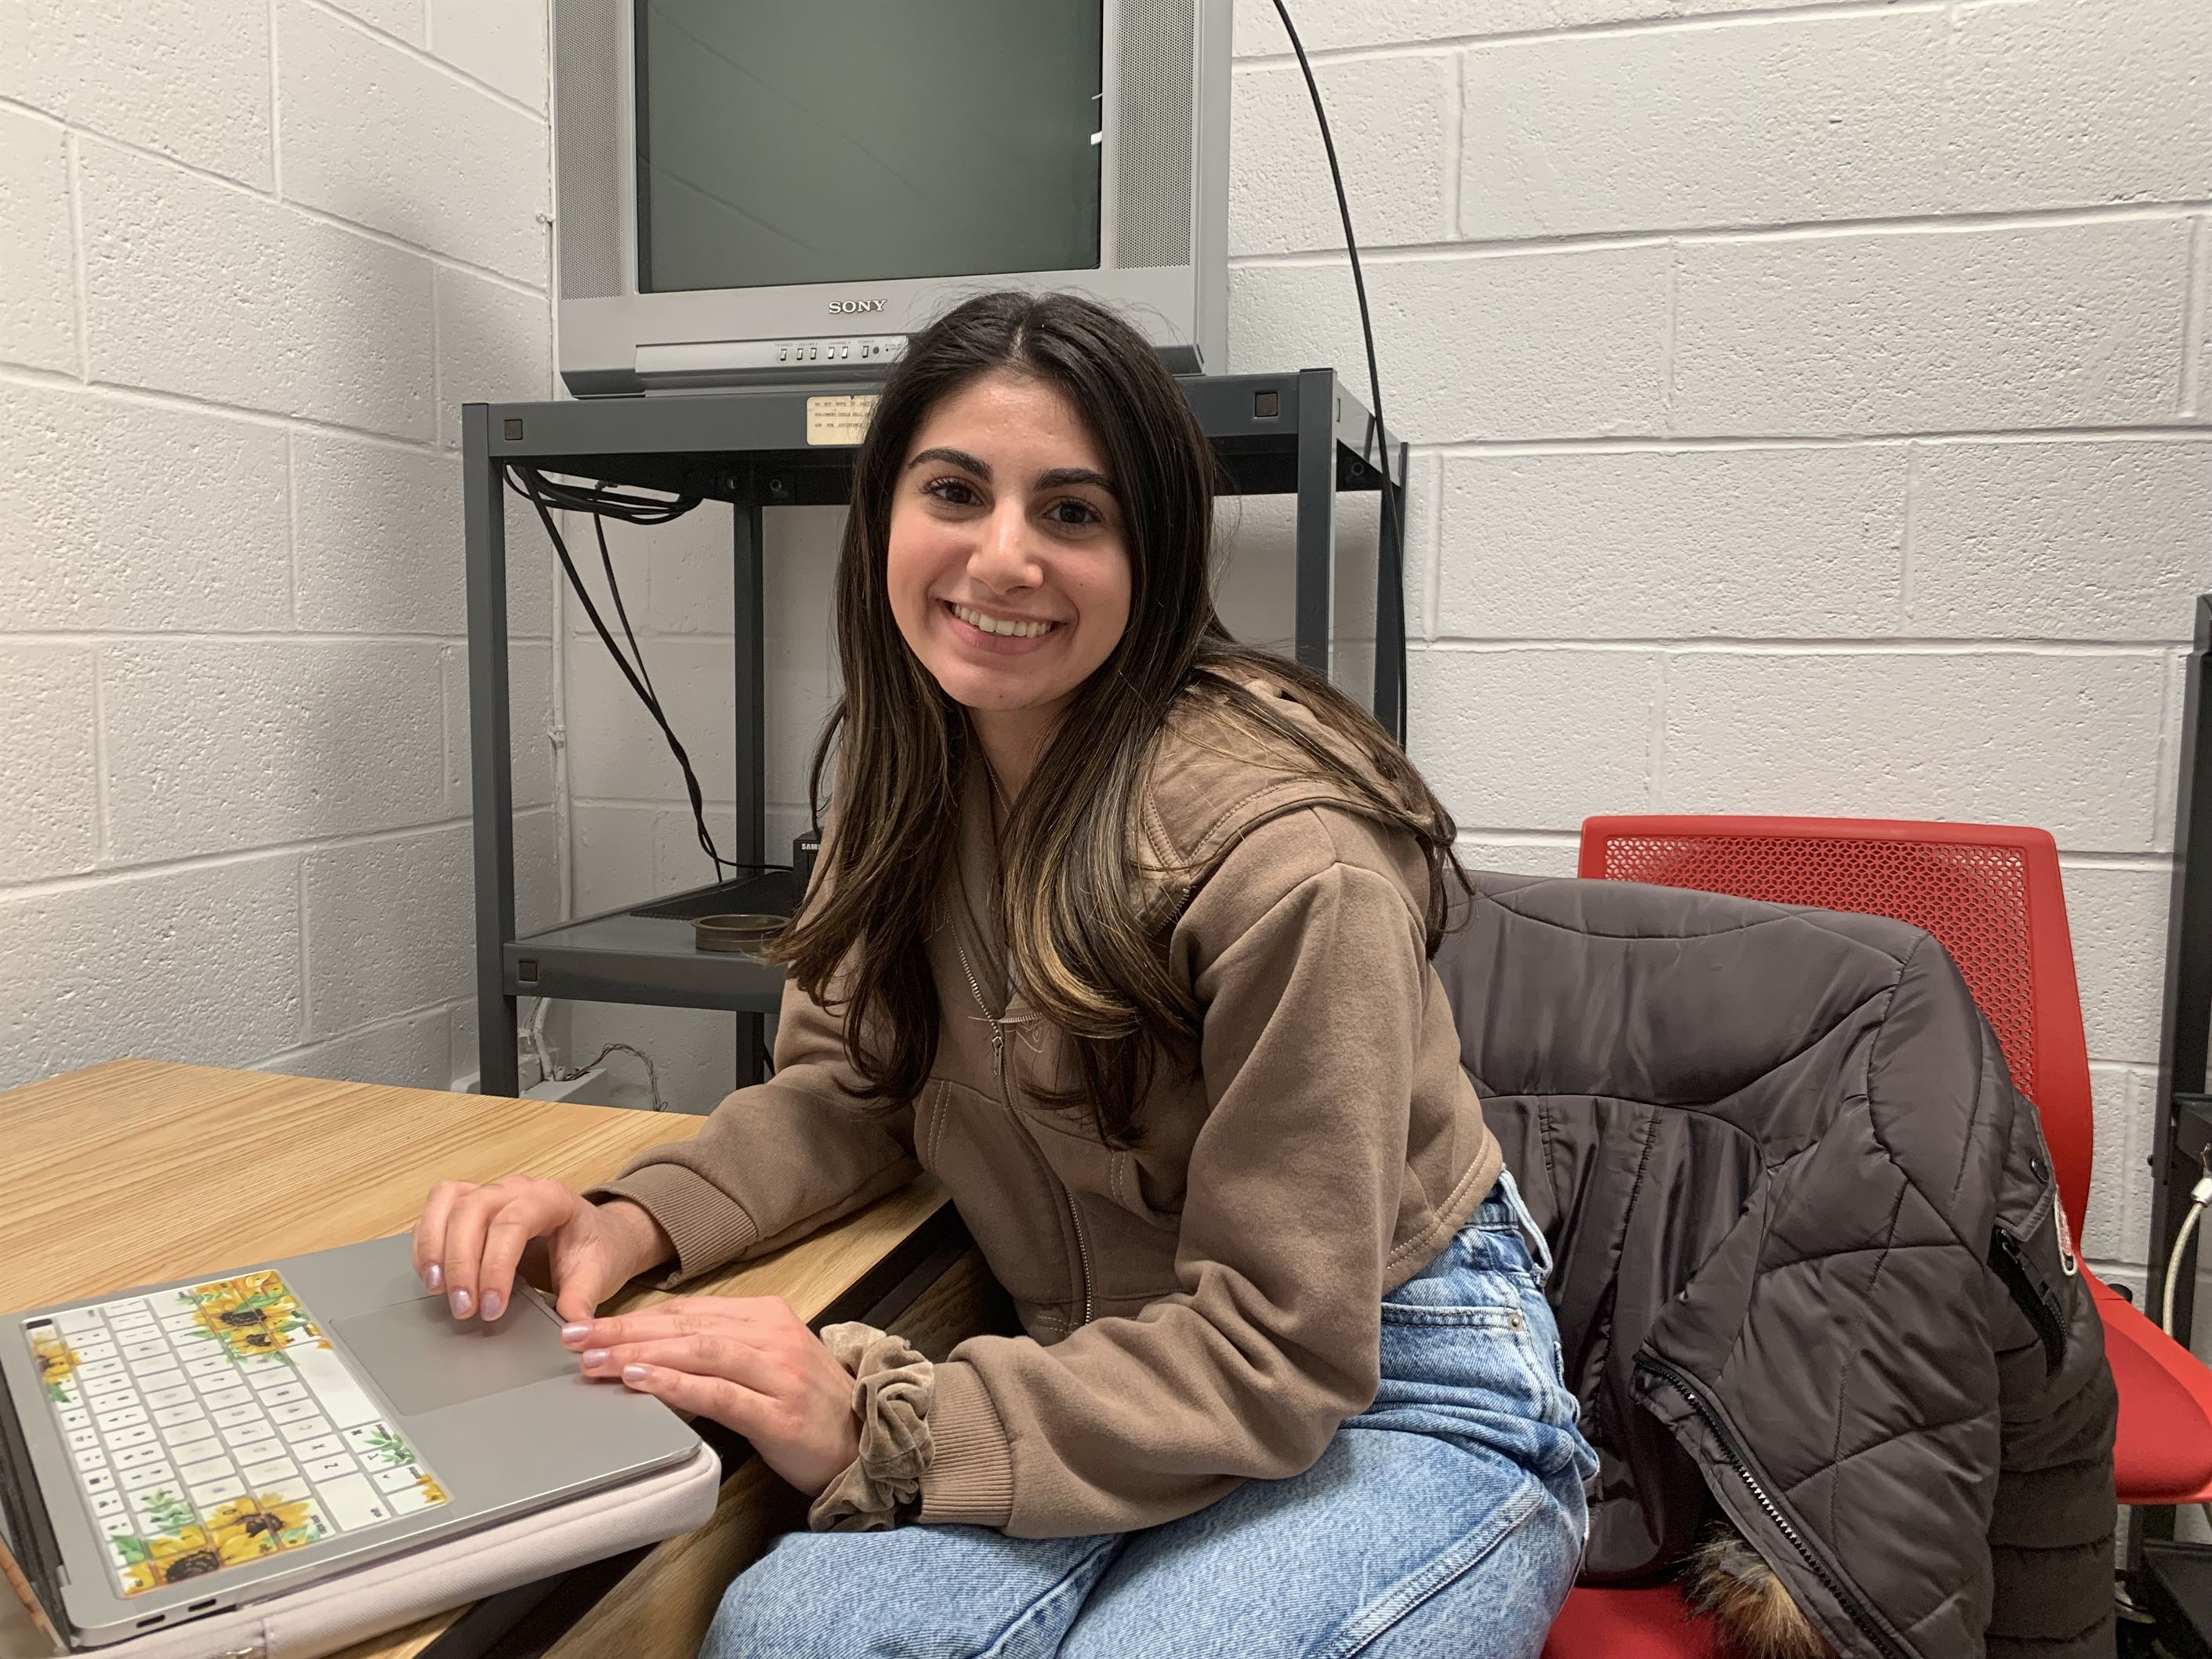 Nicole Passero, a freshman hospitality major, said it's a waste of money to buy textbooks and not use them during the semester. Aidan Ivers | The Montclarion